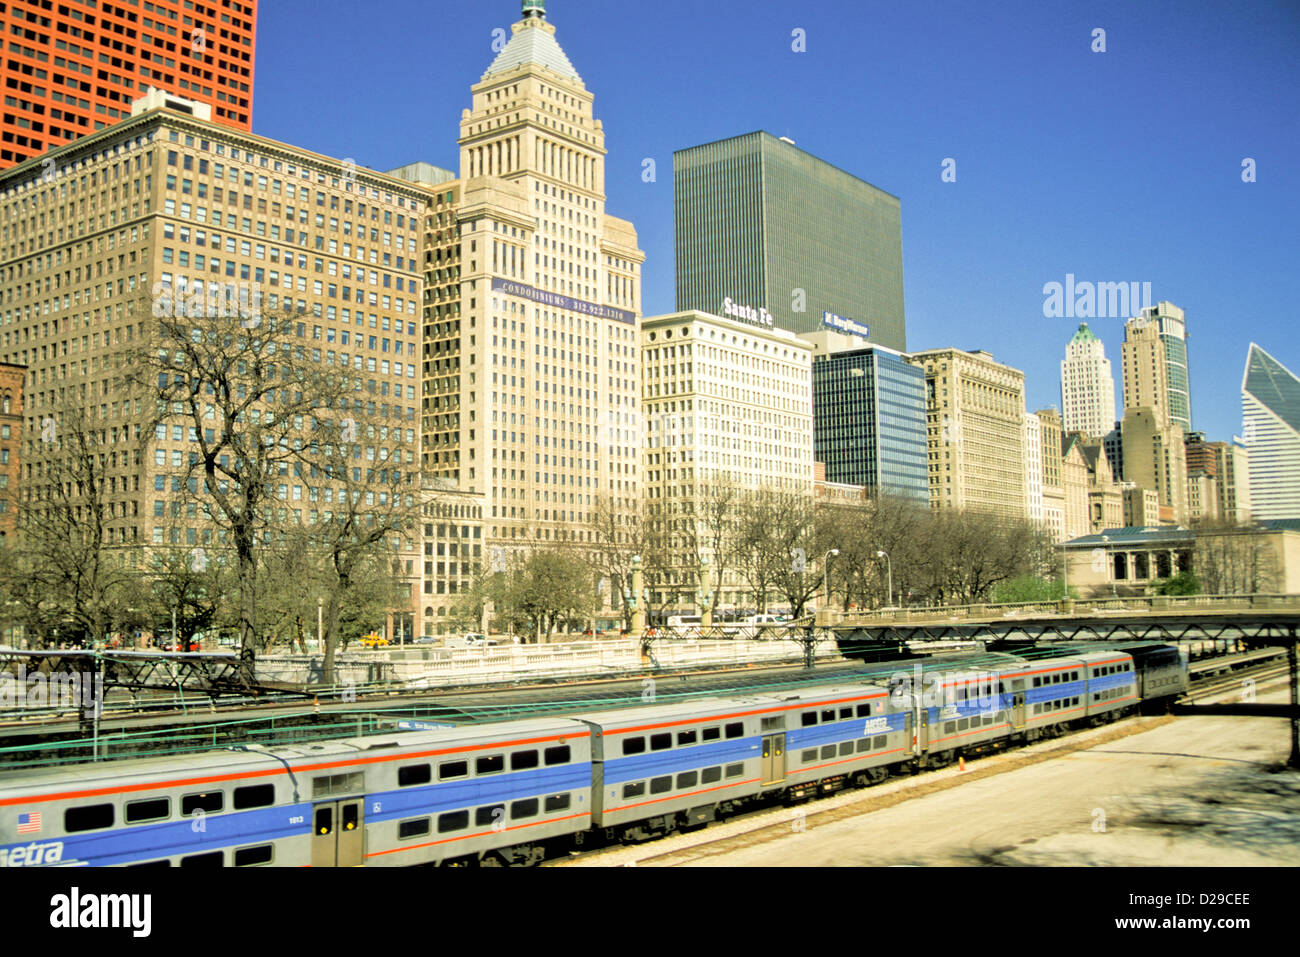 Illinois. Chicago. South Michigan Avenue Buildings And Metra Commuter Train. Stock Photo